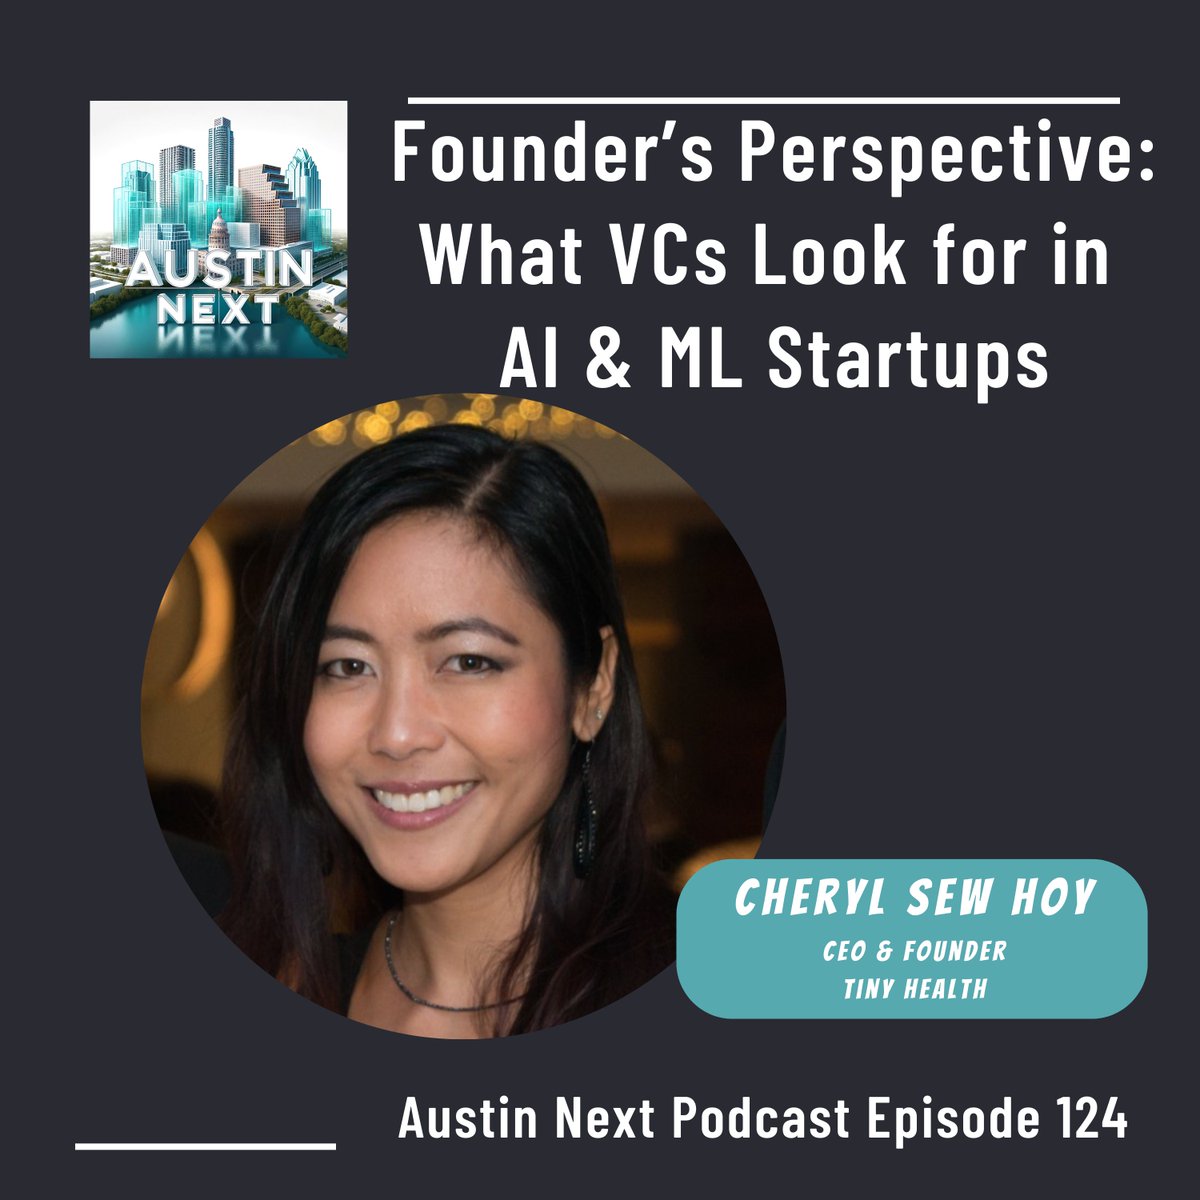 Find the full episode of my fireside chat with @cherylyeoh, Founder & CEO of @GetTinyHealth, from the Austin @DataSciSalon at the links below. Spotify: open.spotify.com/episode/5Y1zyr… Apple: podcasts.apple.com/us/podcast/fou… Austin Next Website: austinnextpodcast.com/founders-persp…